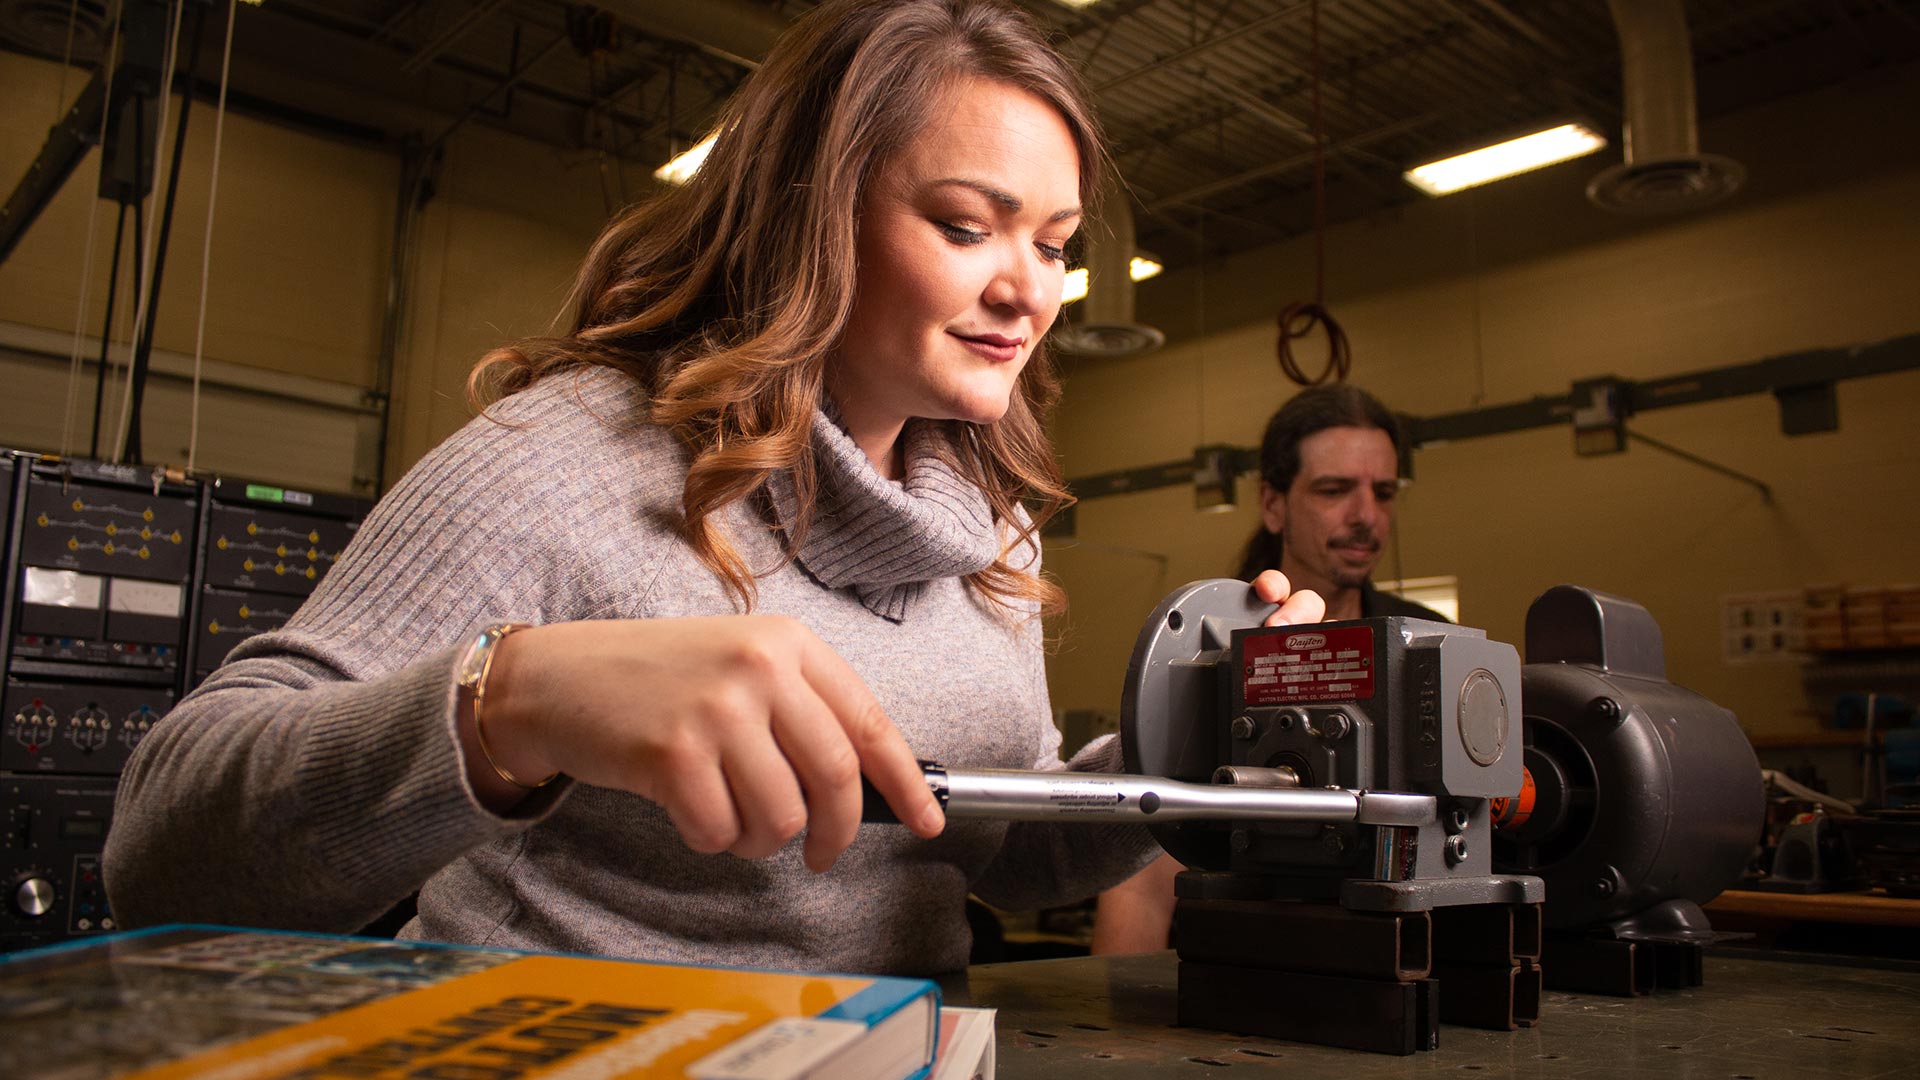 female student working hands on w/ industrial systems device